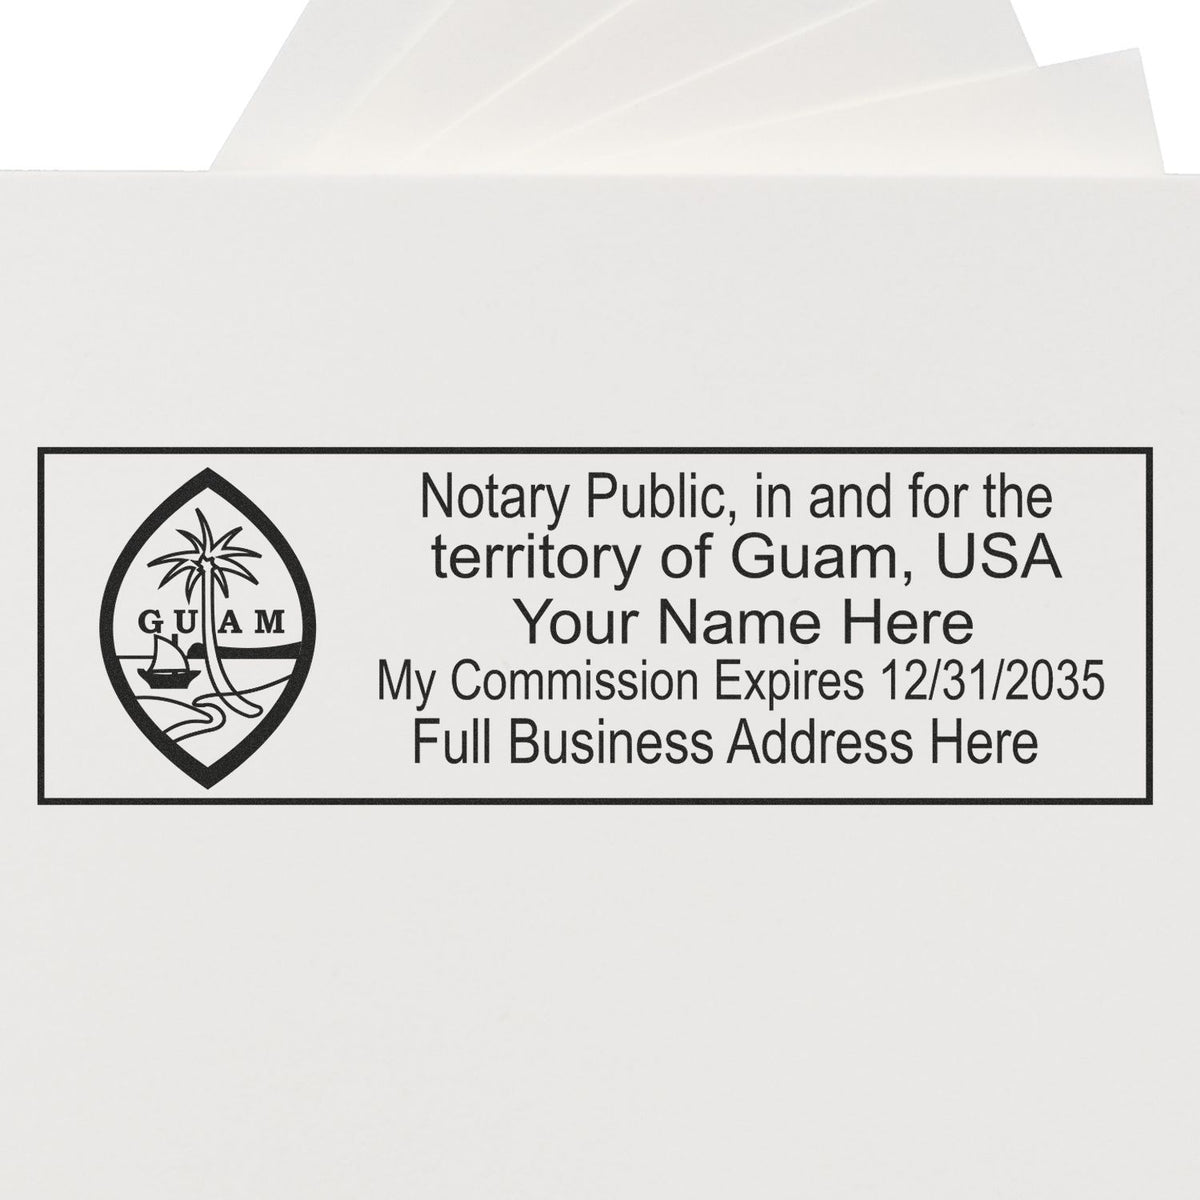 An alternative view of the Super Slim Guam Notary Public Stamp stamped on a sheet of paper showing the image in use